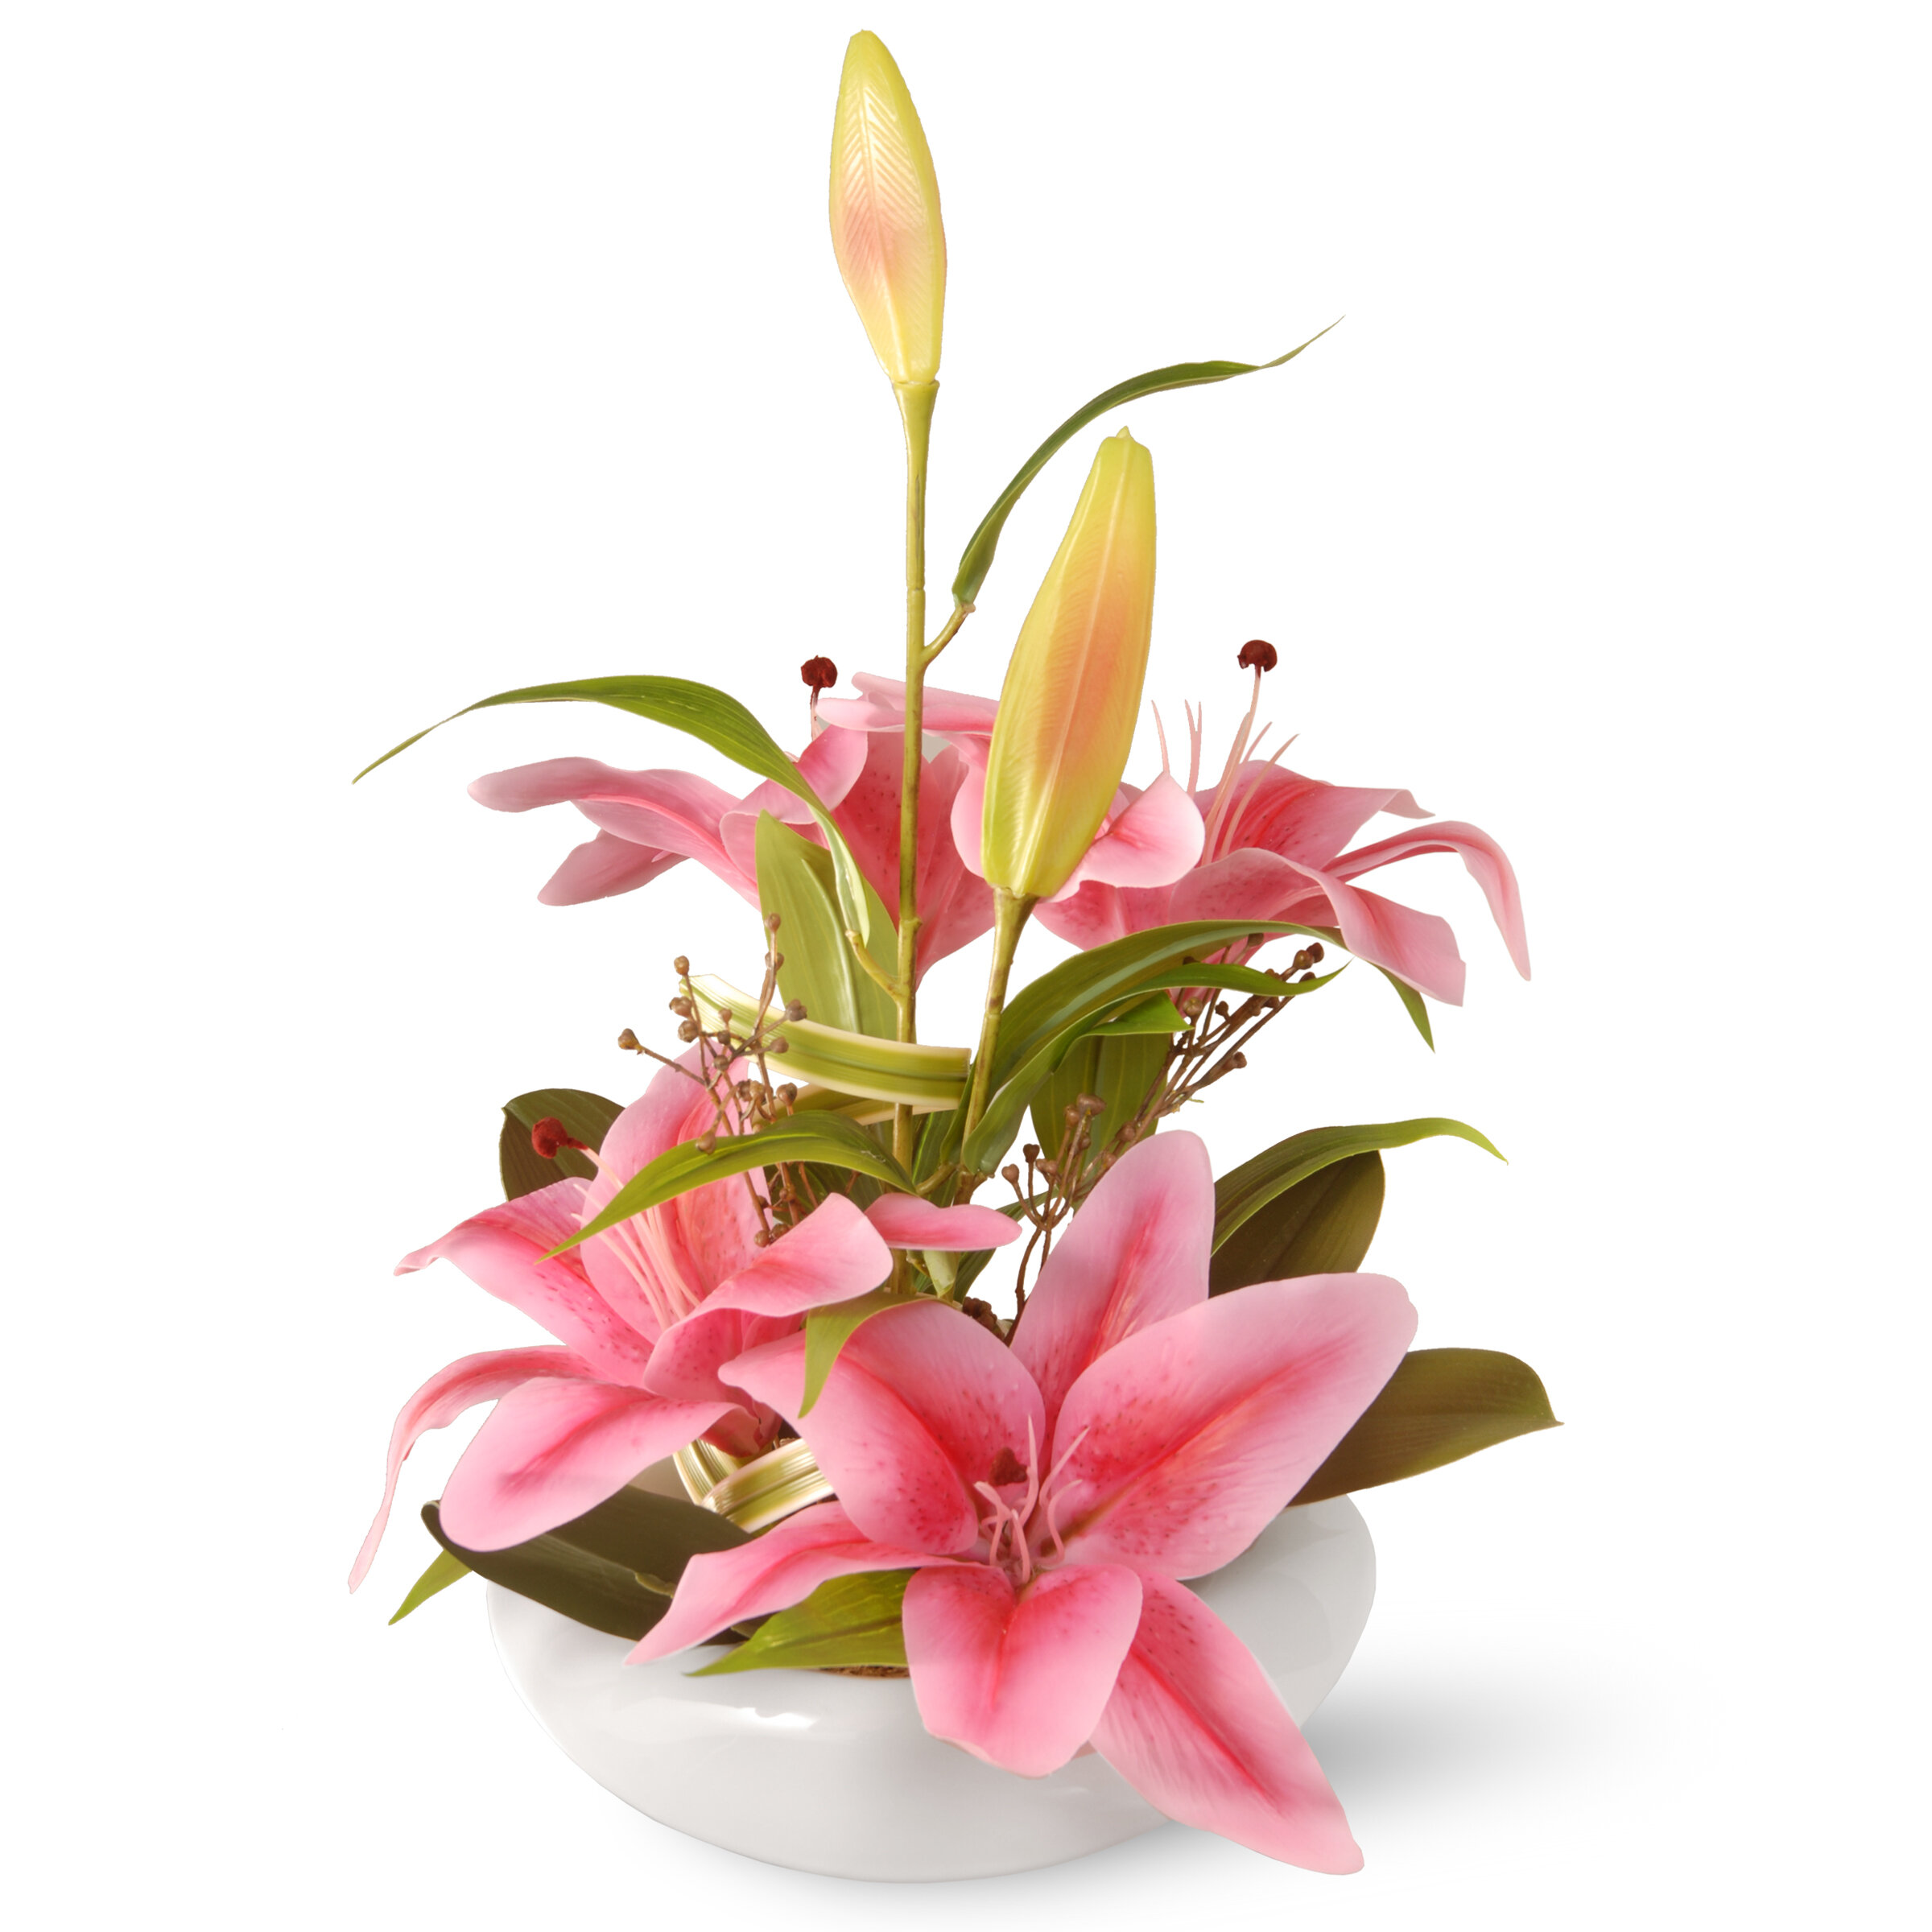 Bay Isle Home Lilies Centerpiece in Planter & Reviews | Wayfair